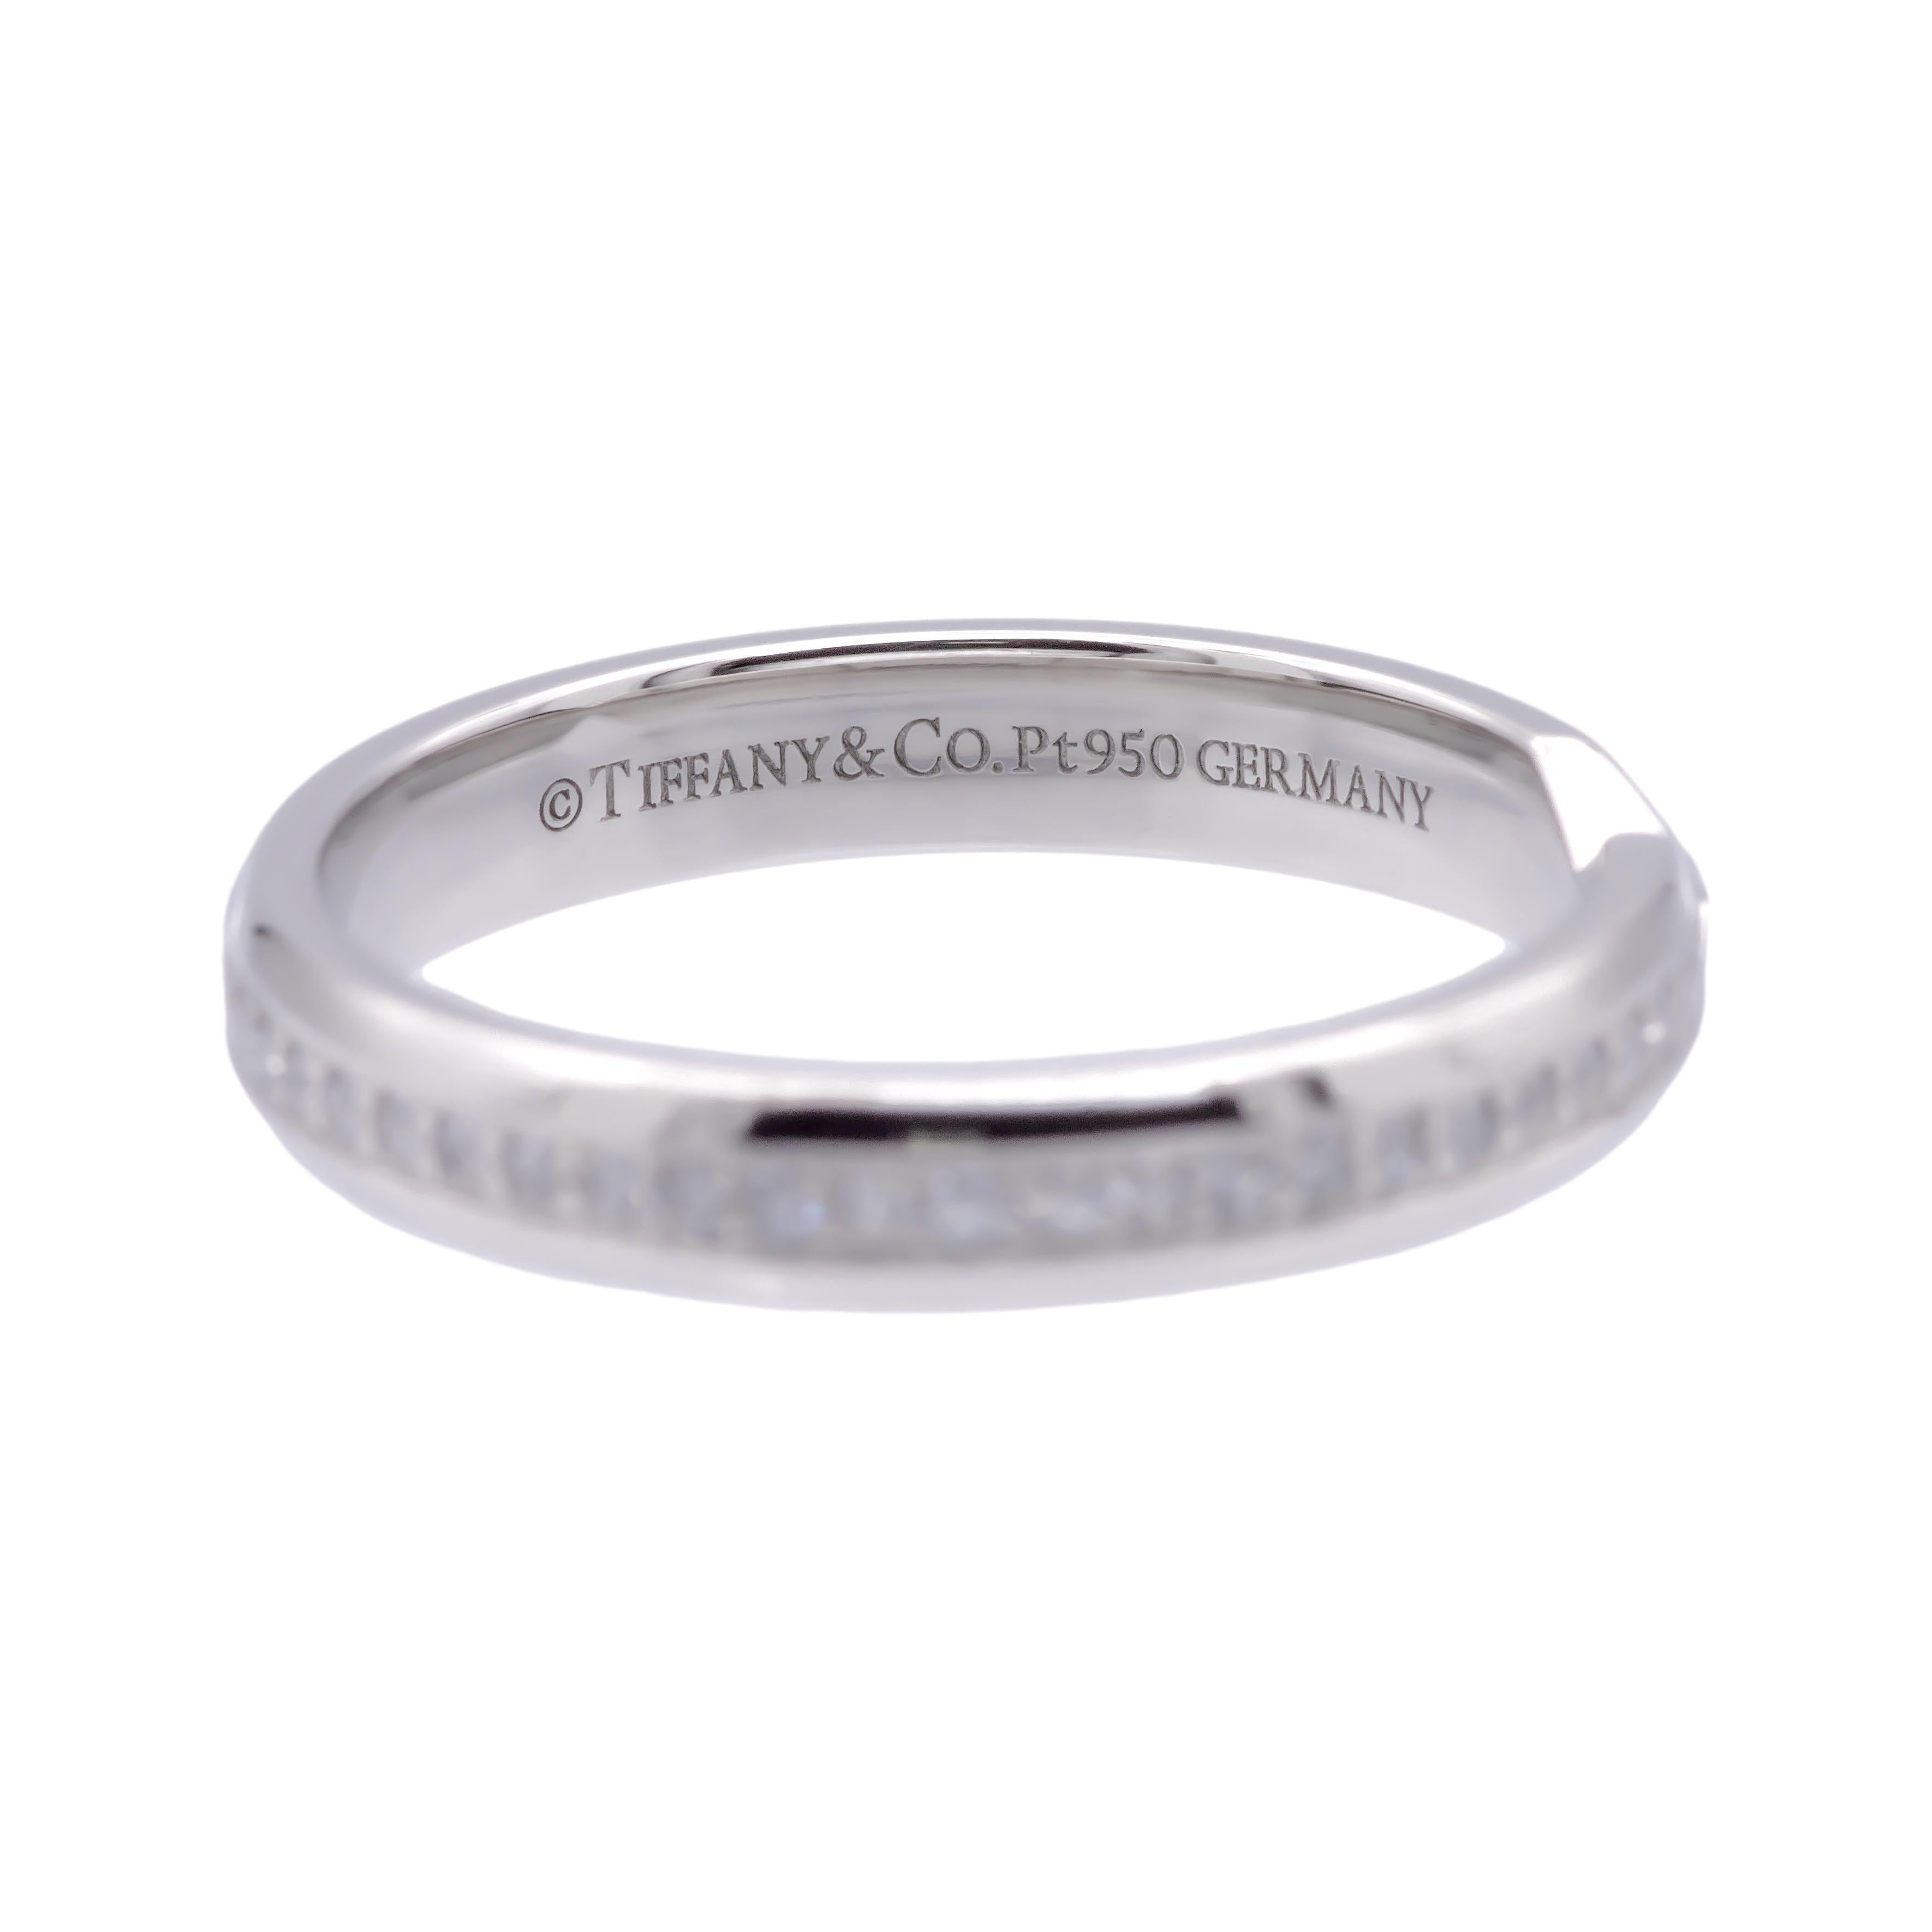 Tiffany & Co. Platinum Nesting Full Circle .14 ct Diamond 3mm Narrow Band Ring In Excellent Condition For Sale In New York, NY